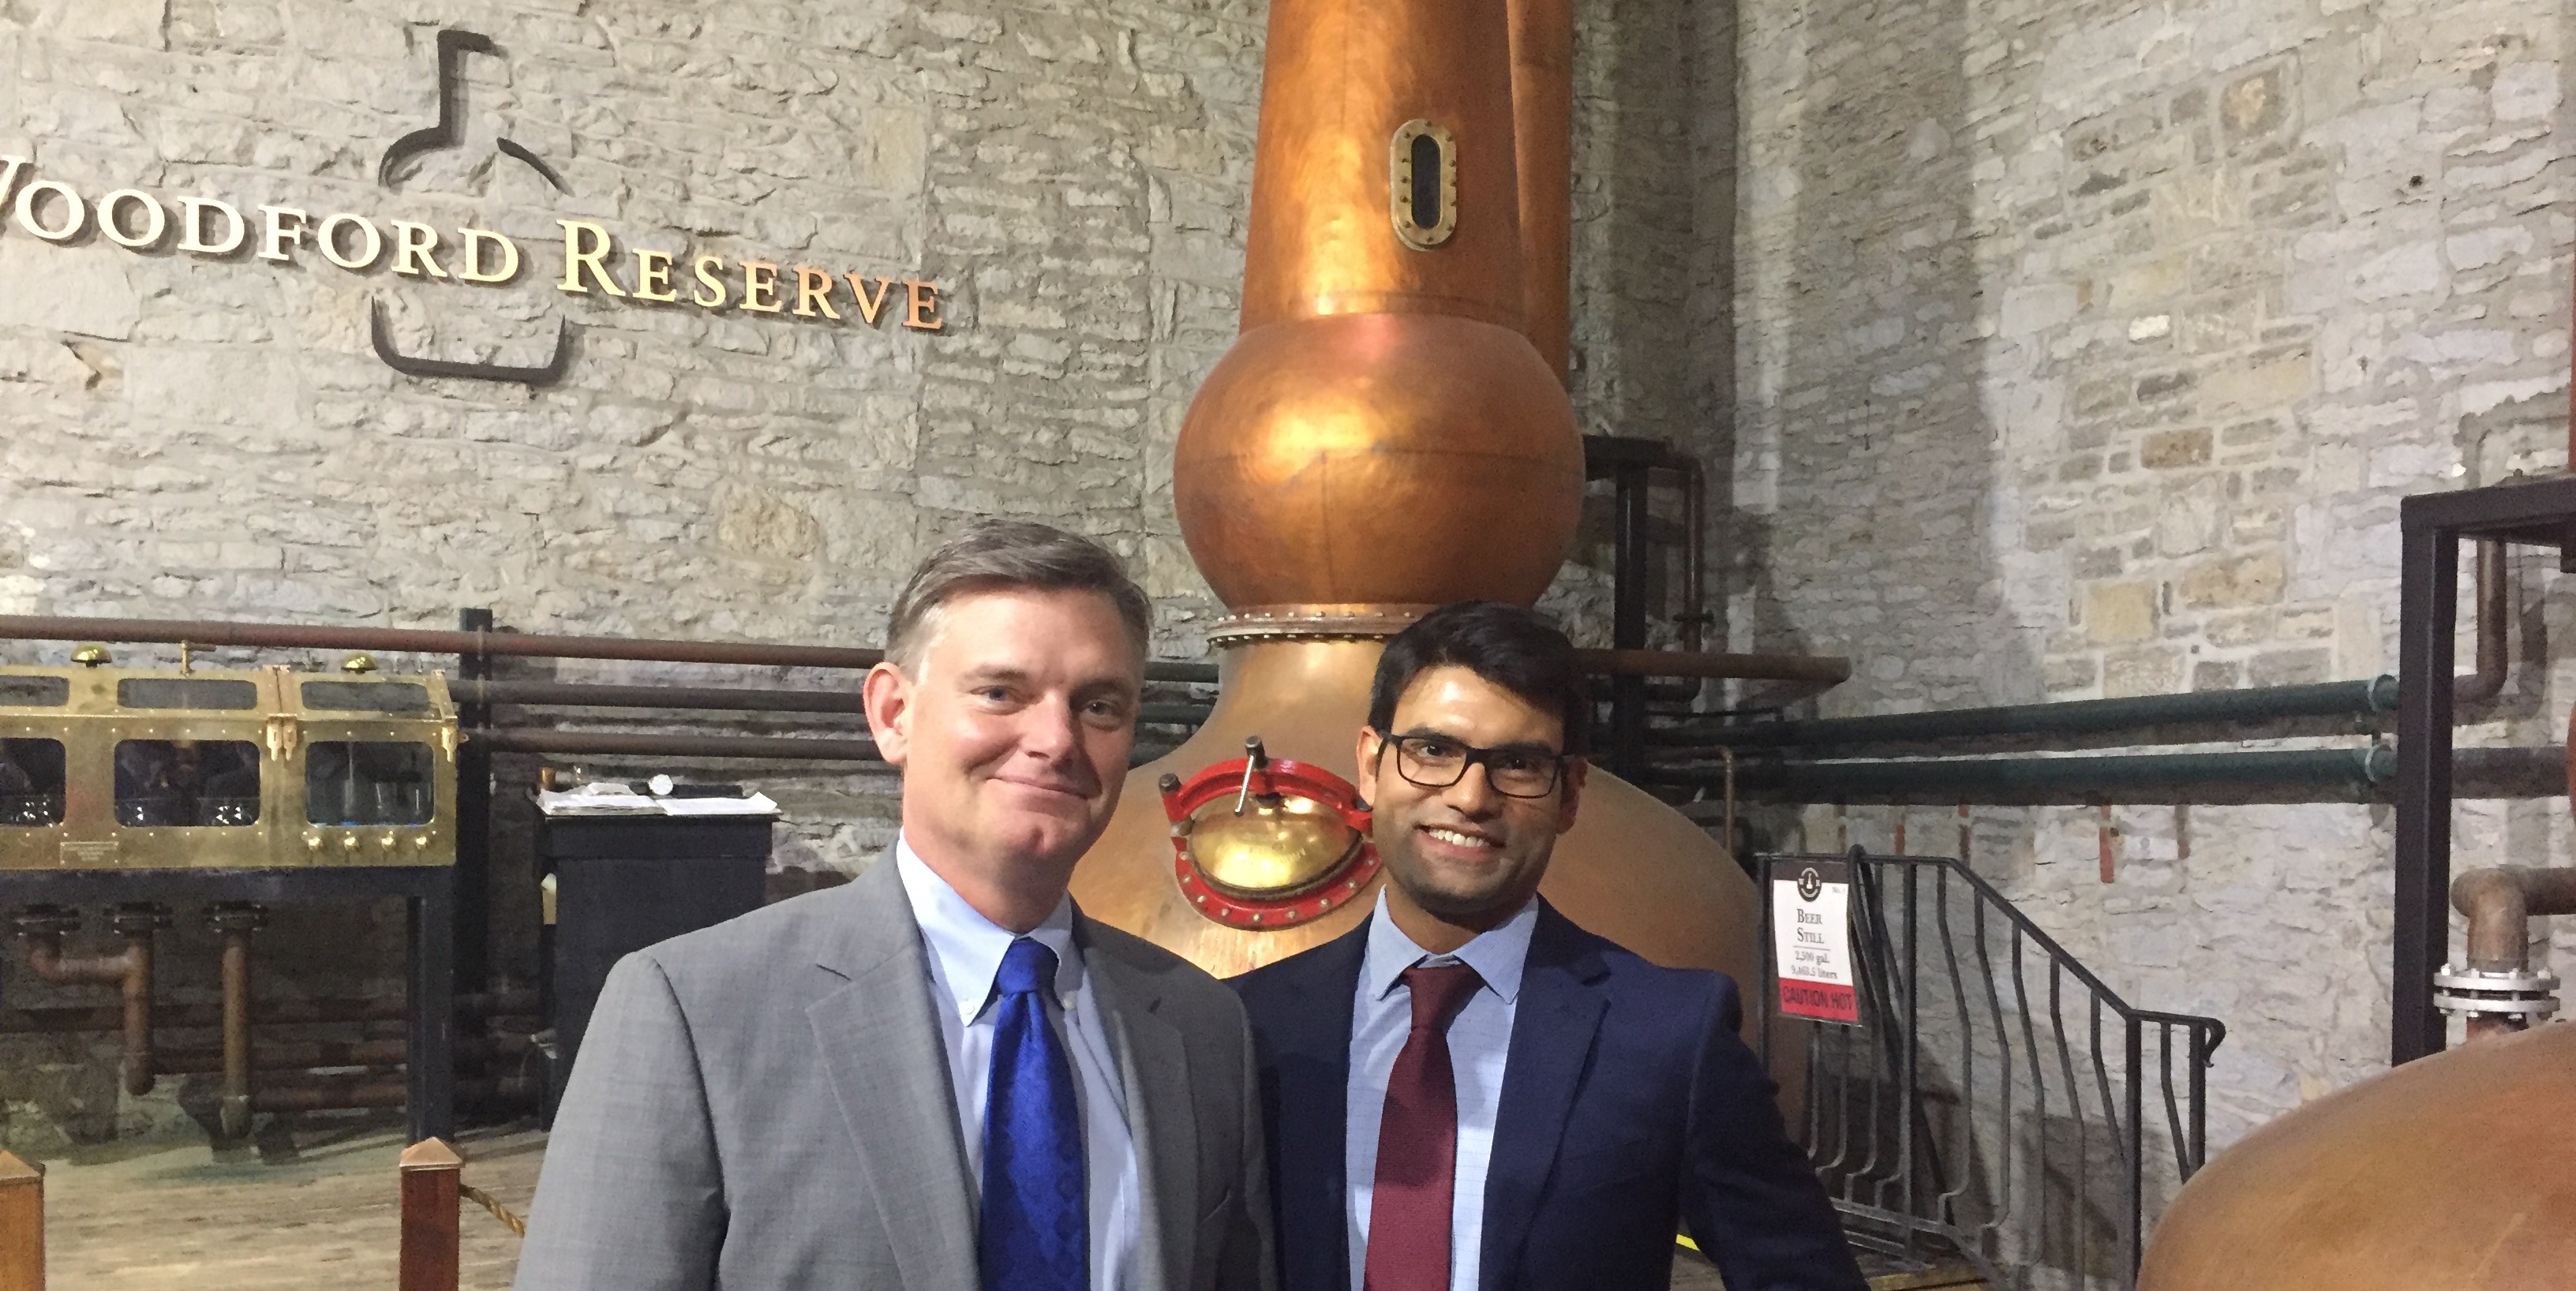 Dr. Peterson and Dr. Gupta at the Woodford Reserve for an invited lecture